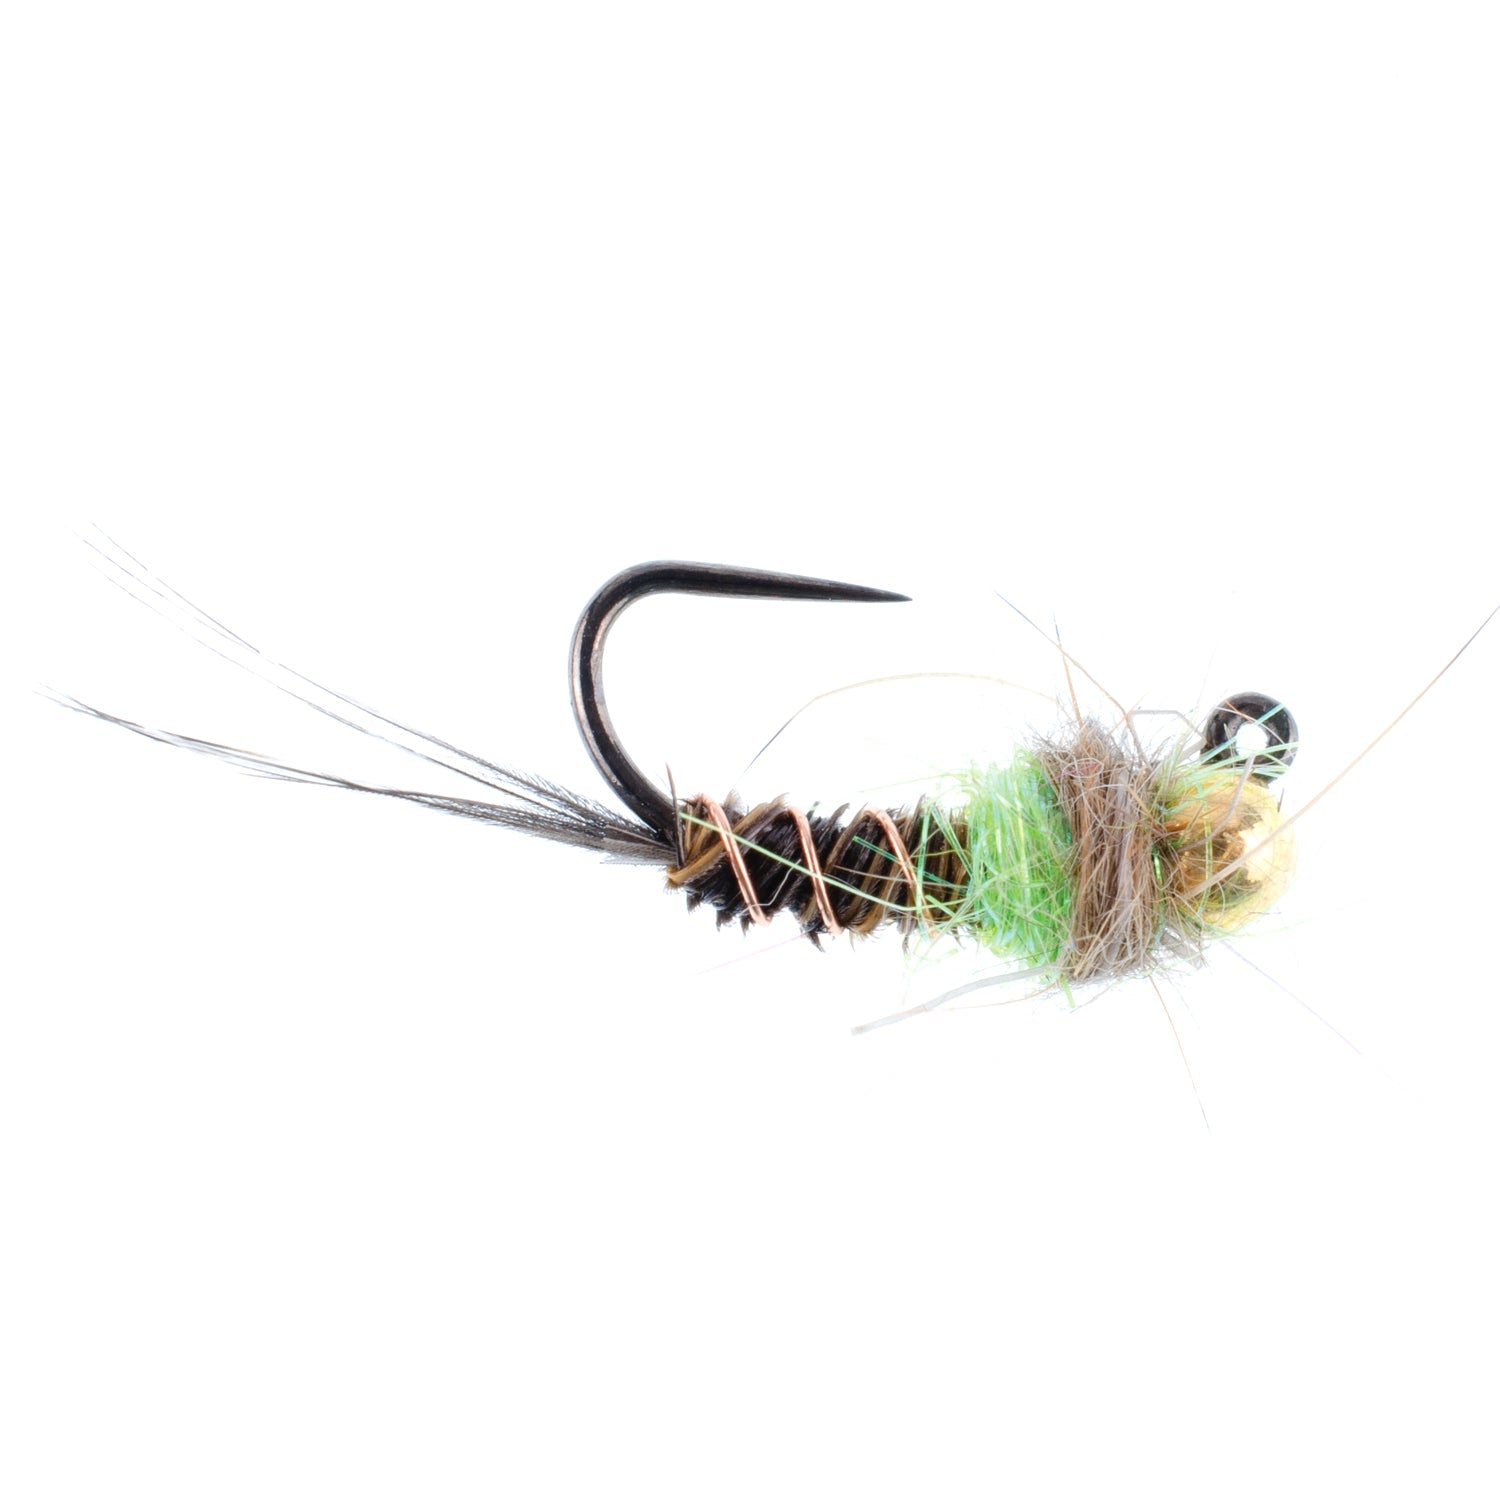 Tungsten Bead Hot Spot Pheasant Tail Tactical Jig Chartreuse Czech Nymph Euro Nymphing Fly - 6 Flies Size 14